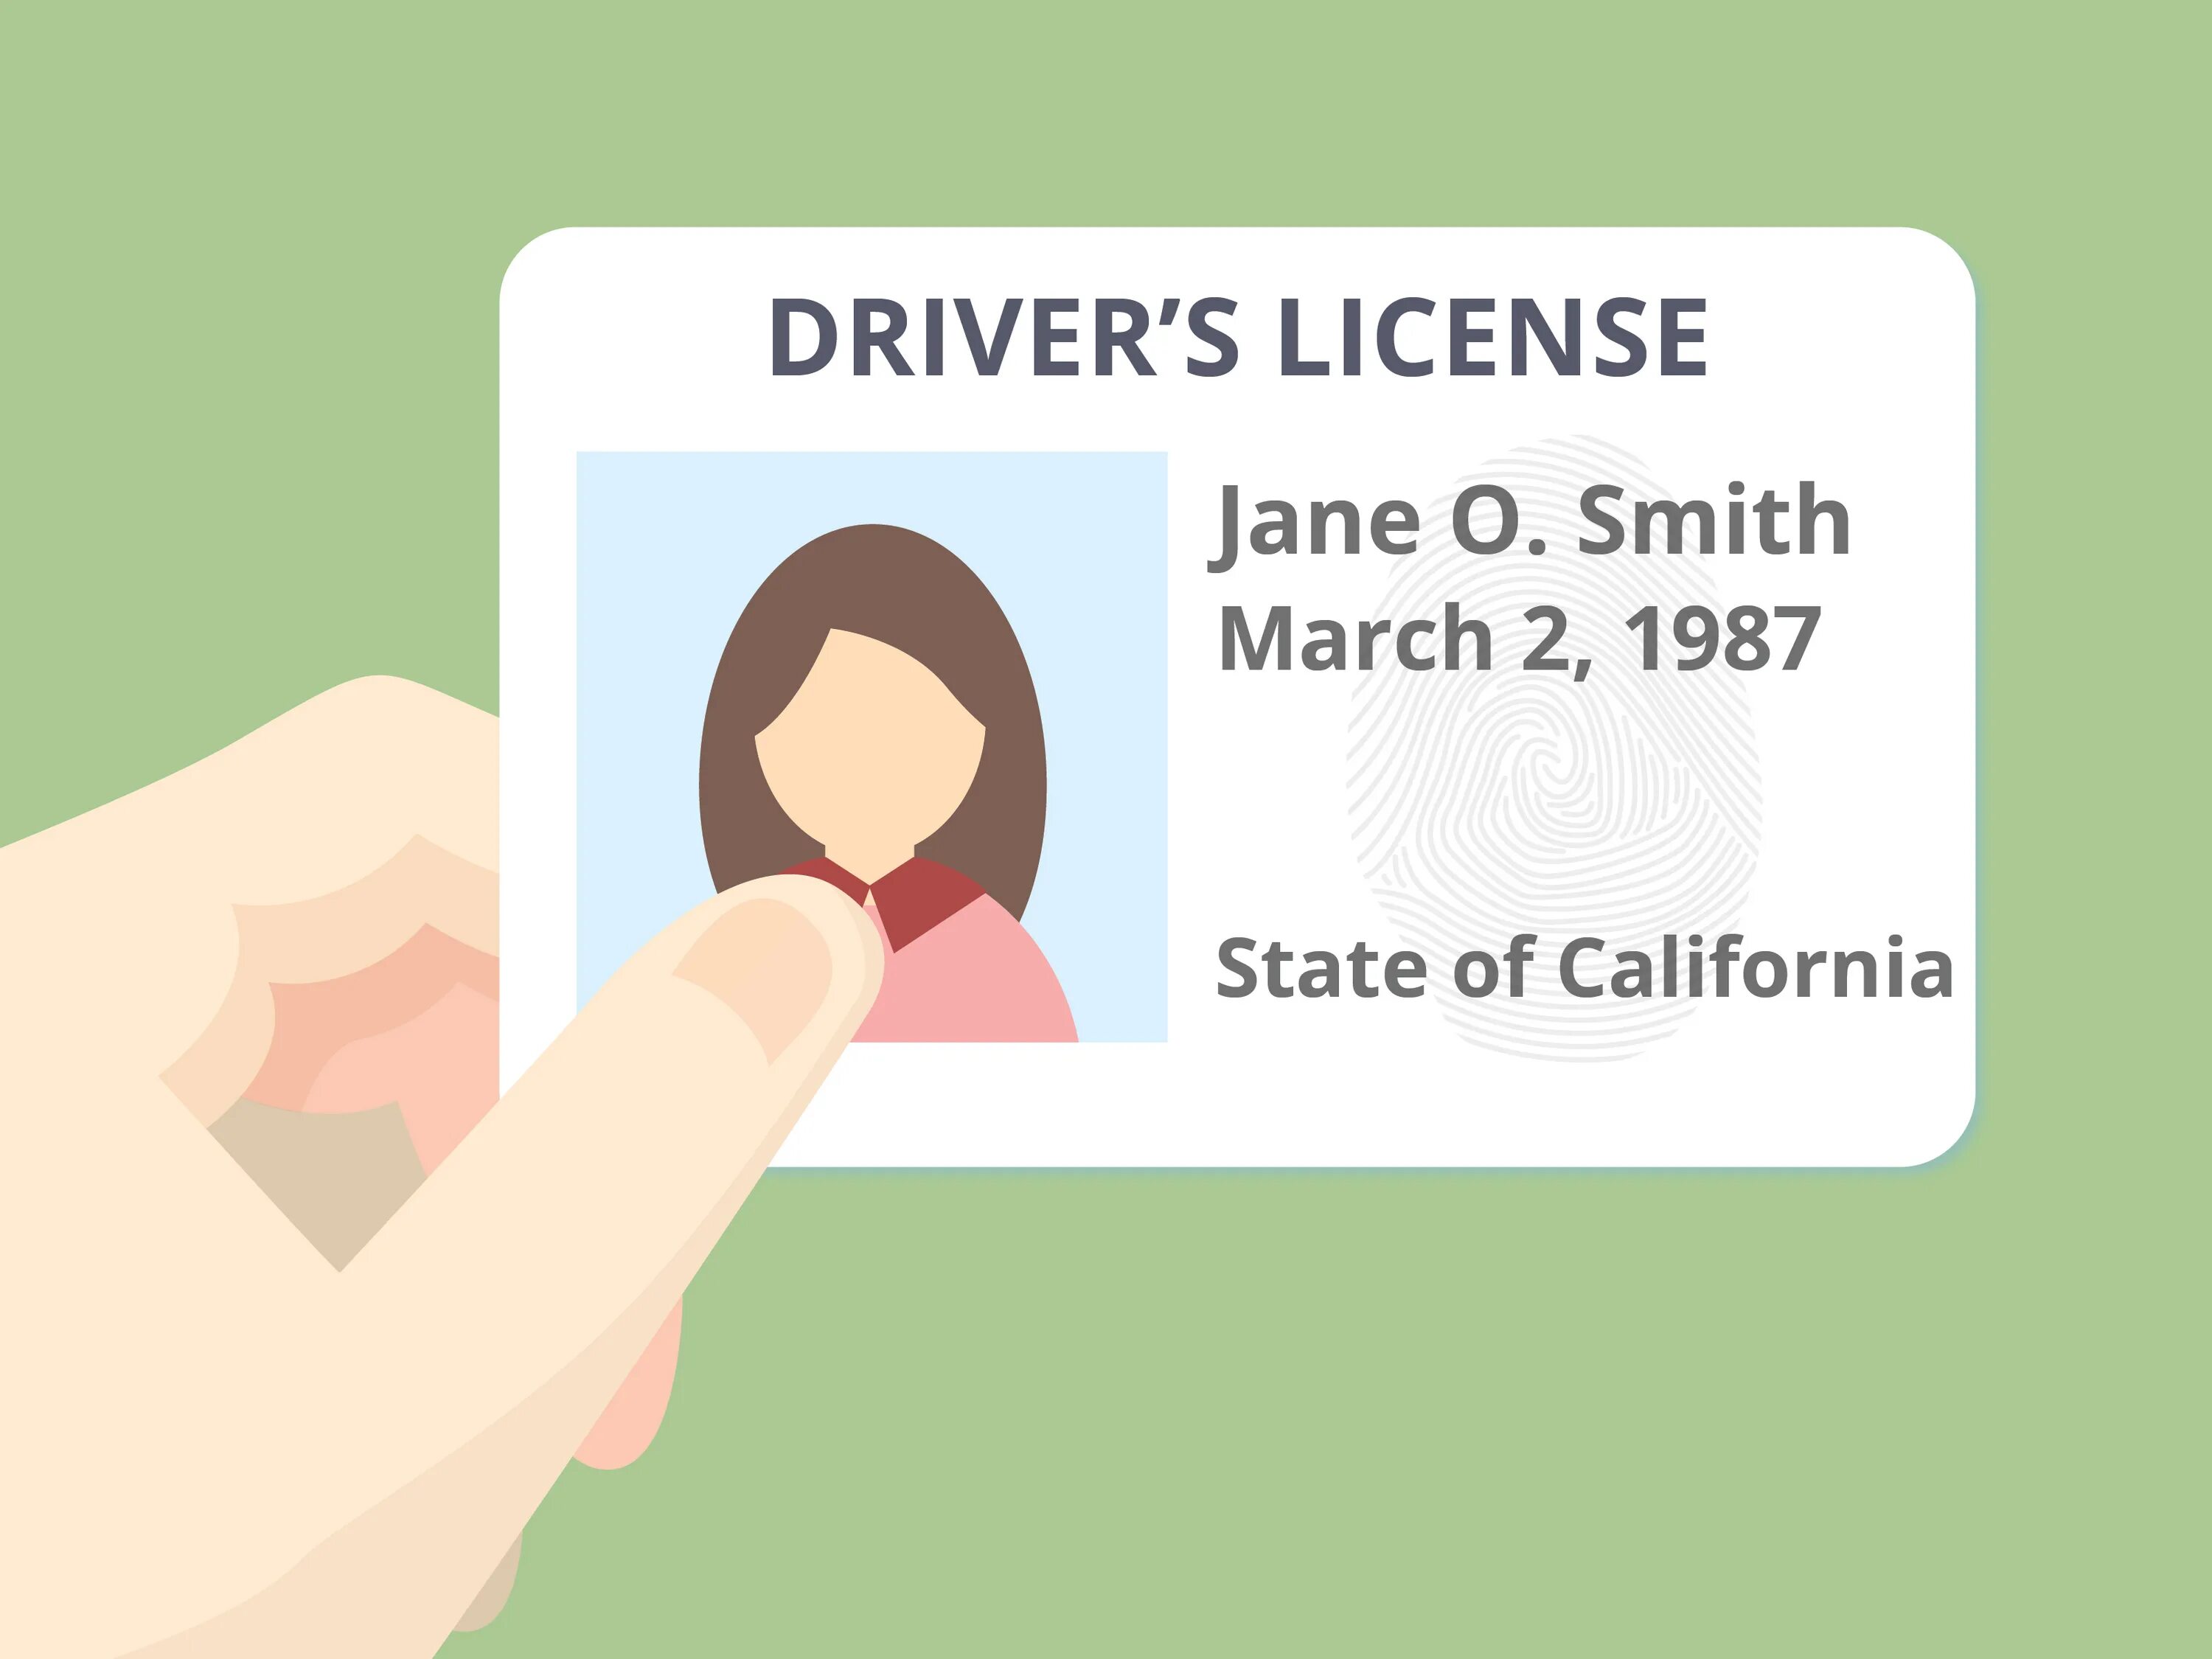 Jane a student for 2. Learner permit. Boating License. Learner permit class d. New York State Learner permit.